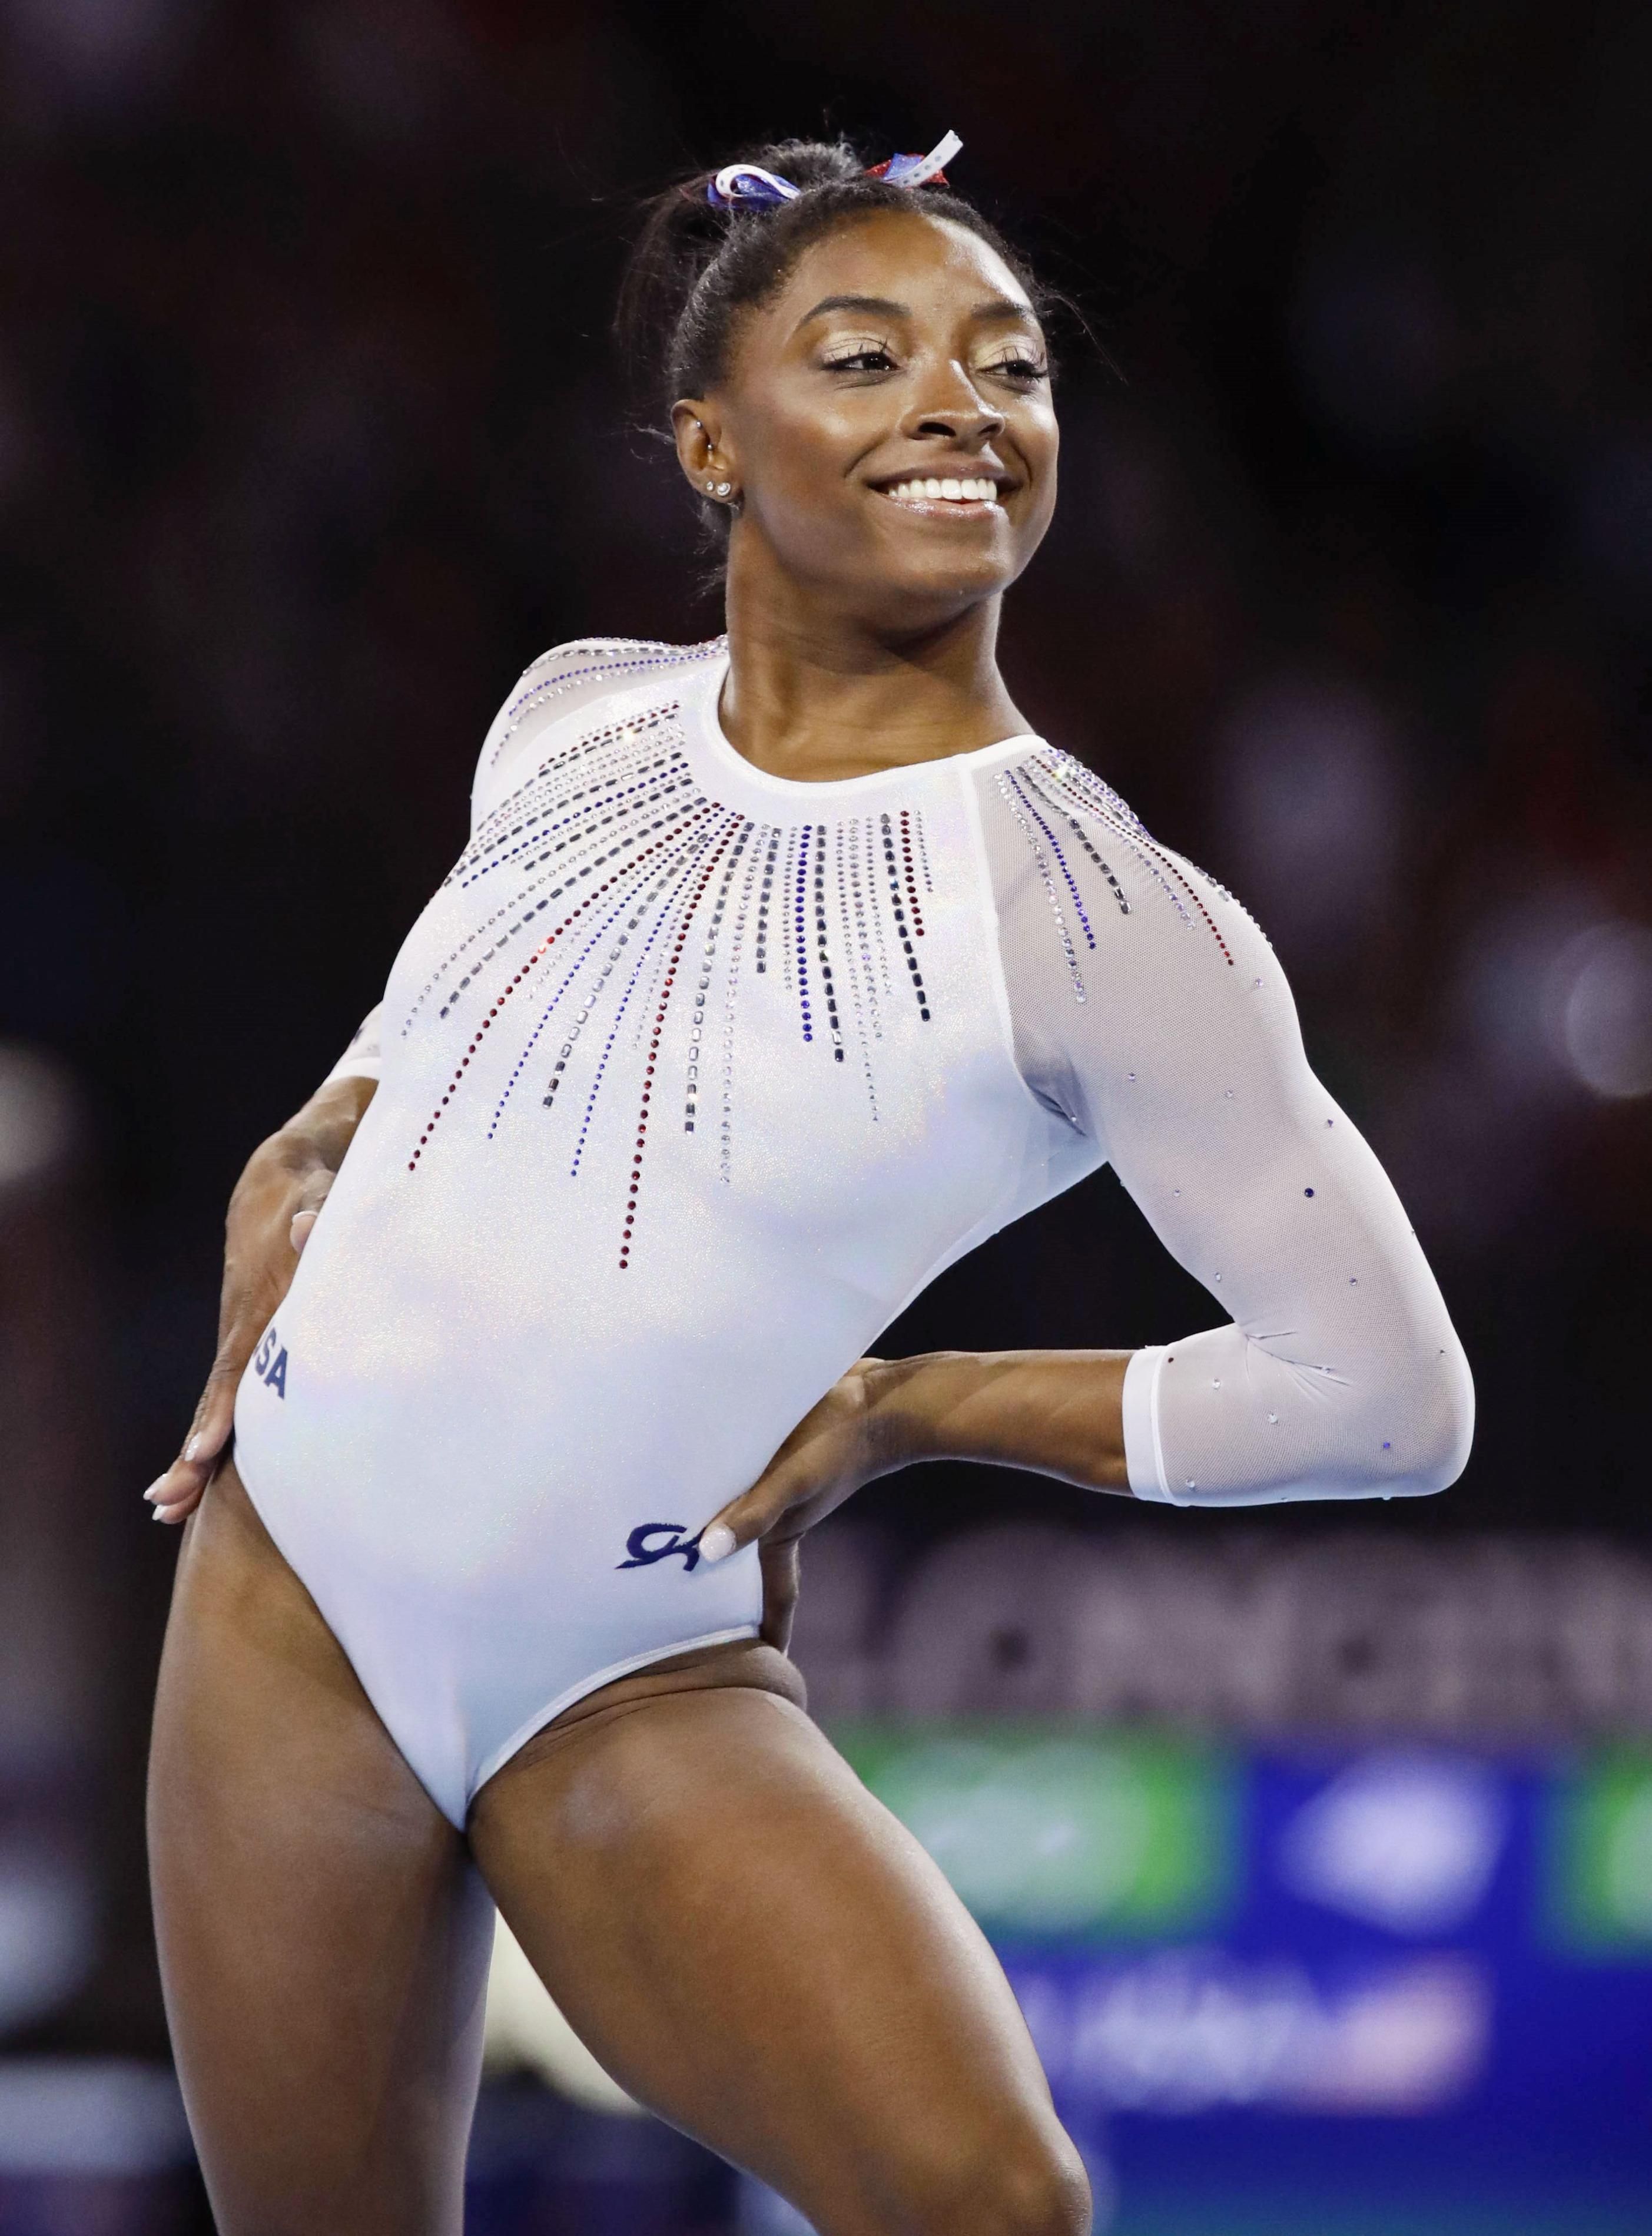 Simone Biles performs at the World Gymnastics Championships in Stuttgart, Germany on October 10, 2019. | Source: Getty Images